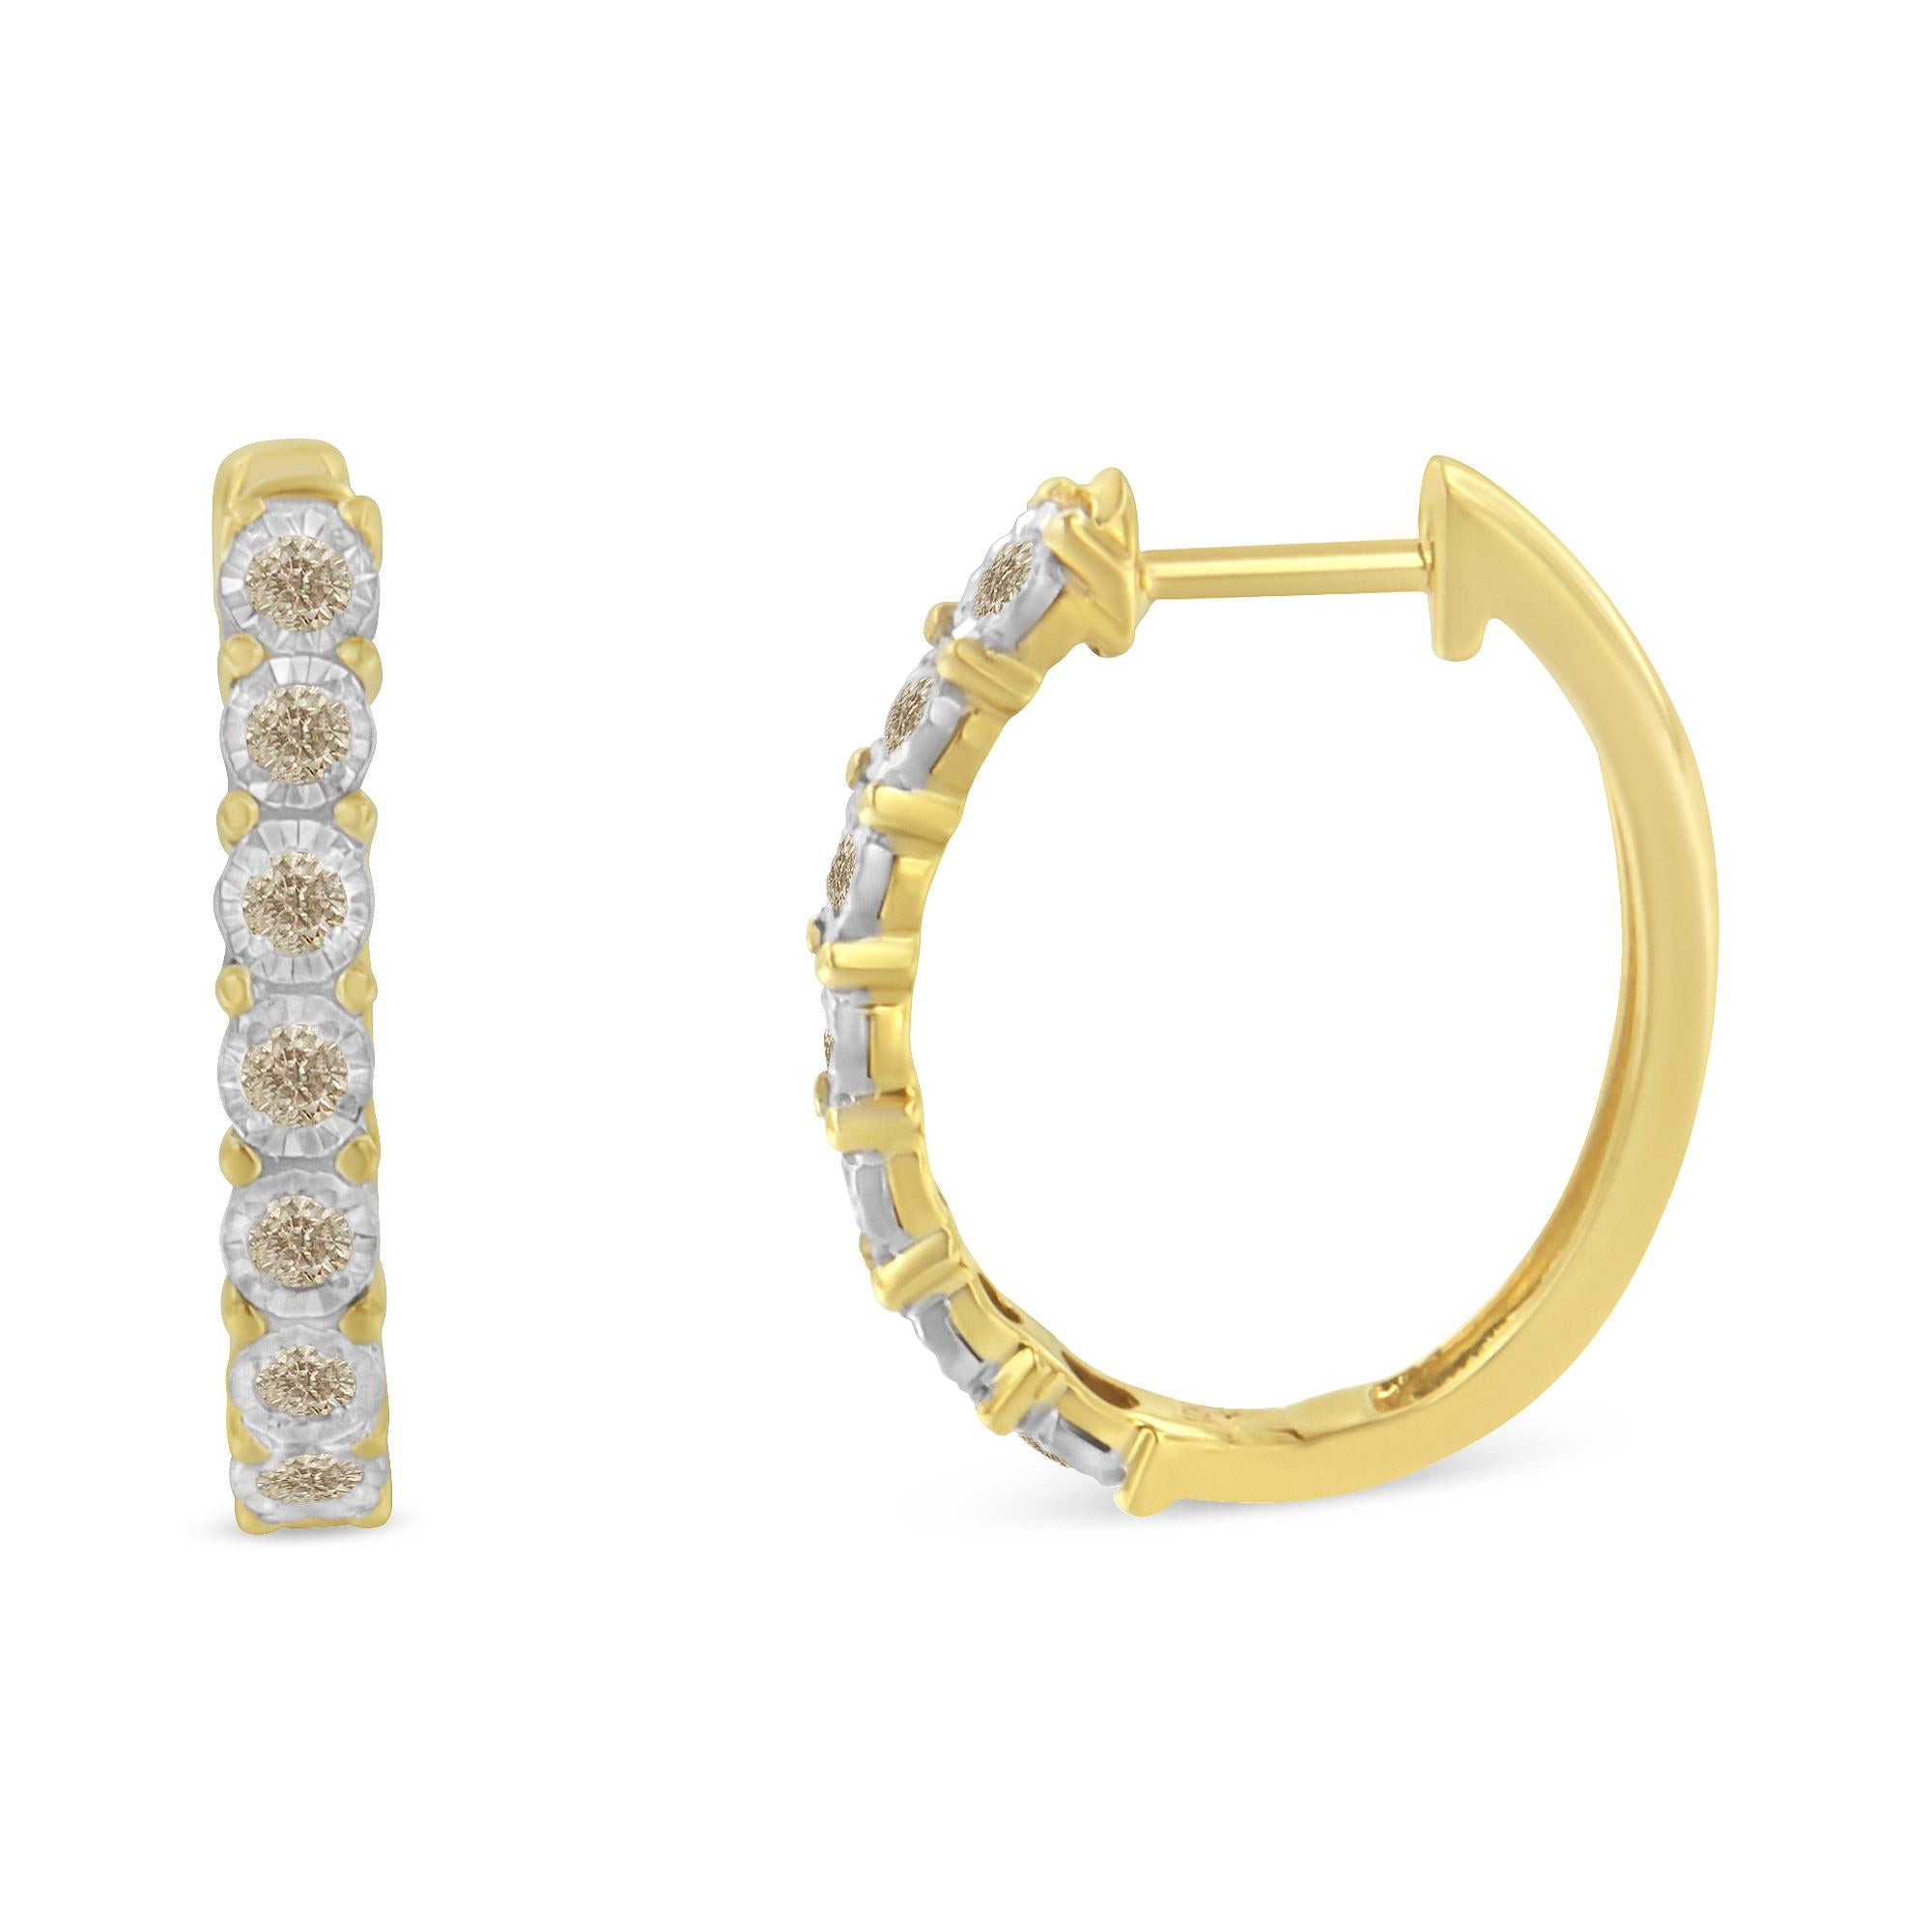 Contemporary 10K Two-Toned Gold 1/2 Carat Diamond Hoop Earrings For Sale